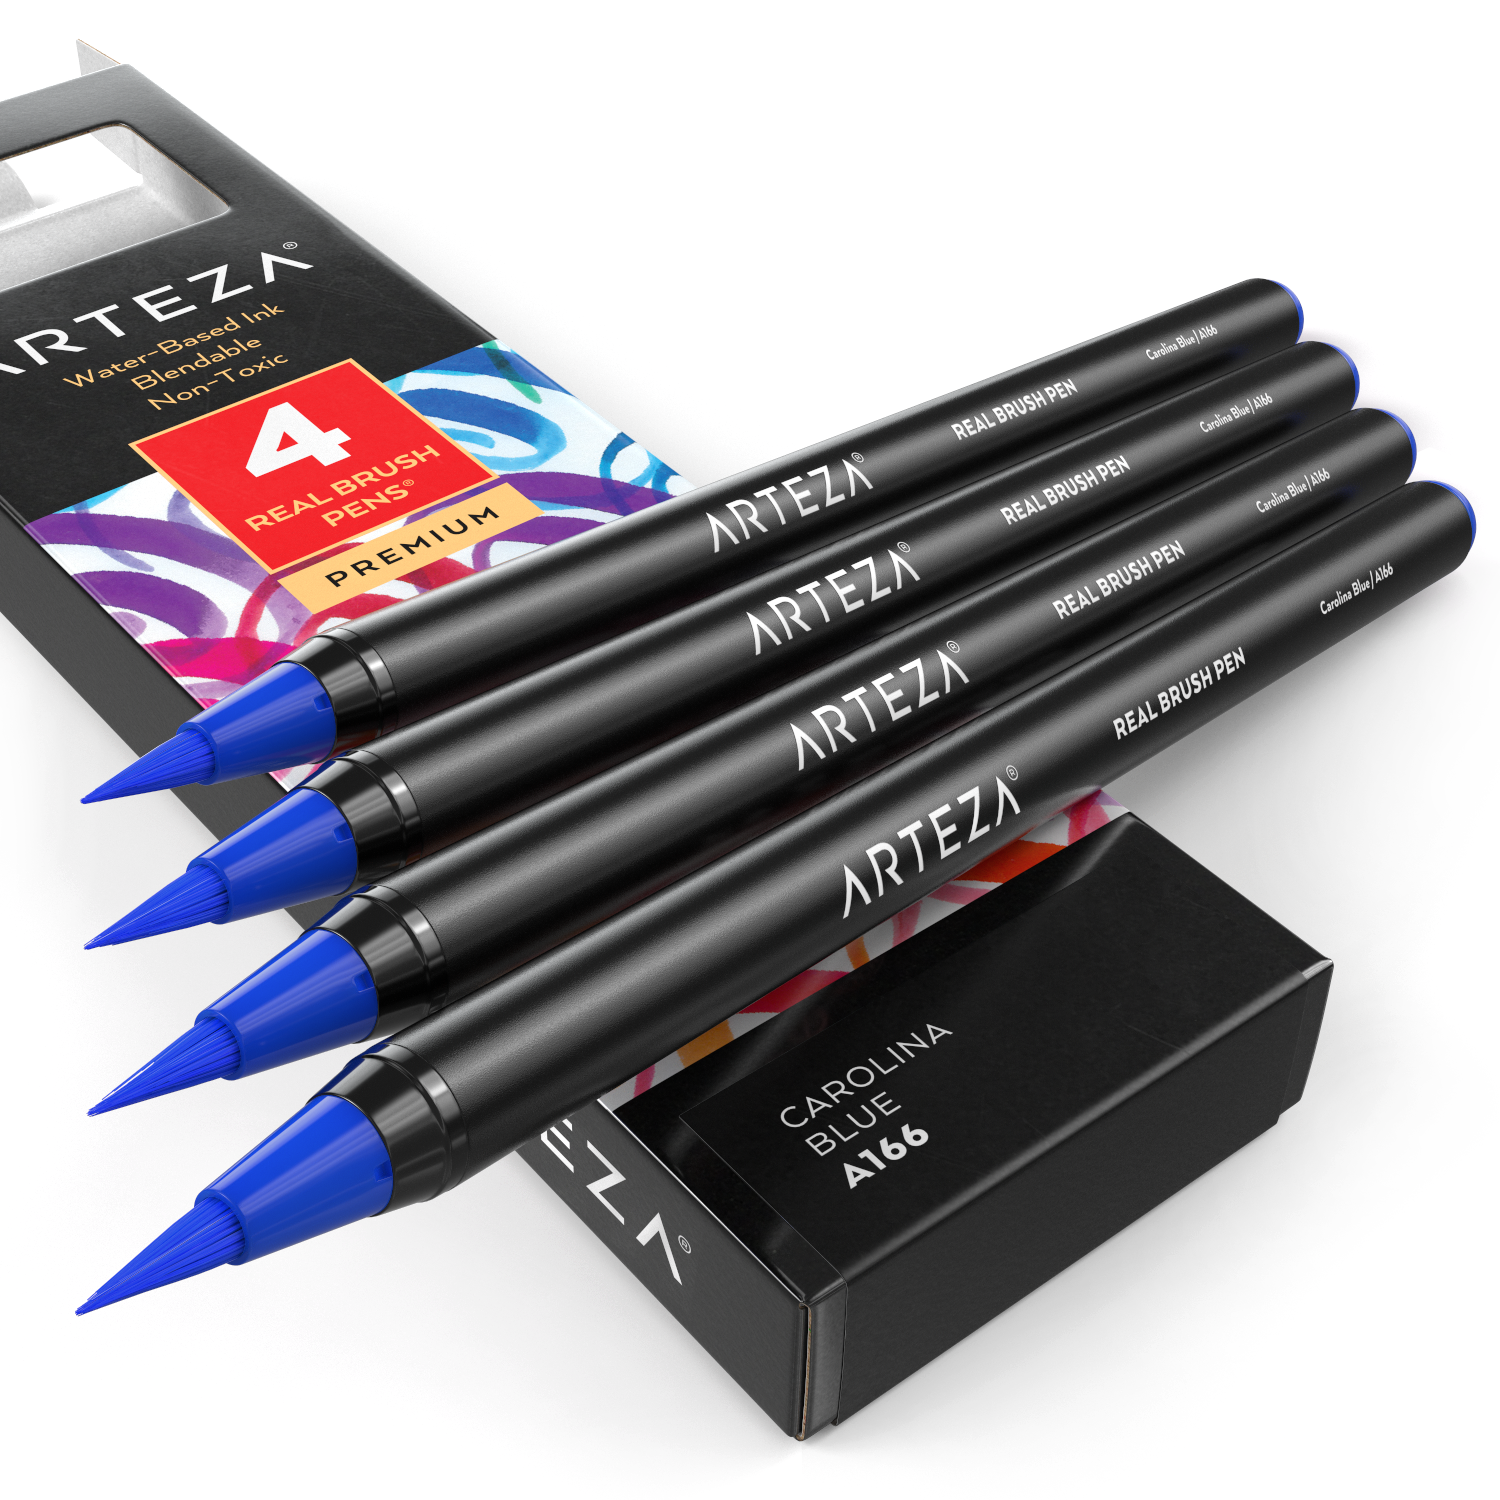 Arteza Real Brush Pens  16 Techniques You Should LEARN IN 2020 (Helpful  Hints) 